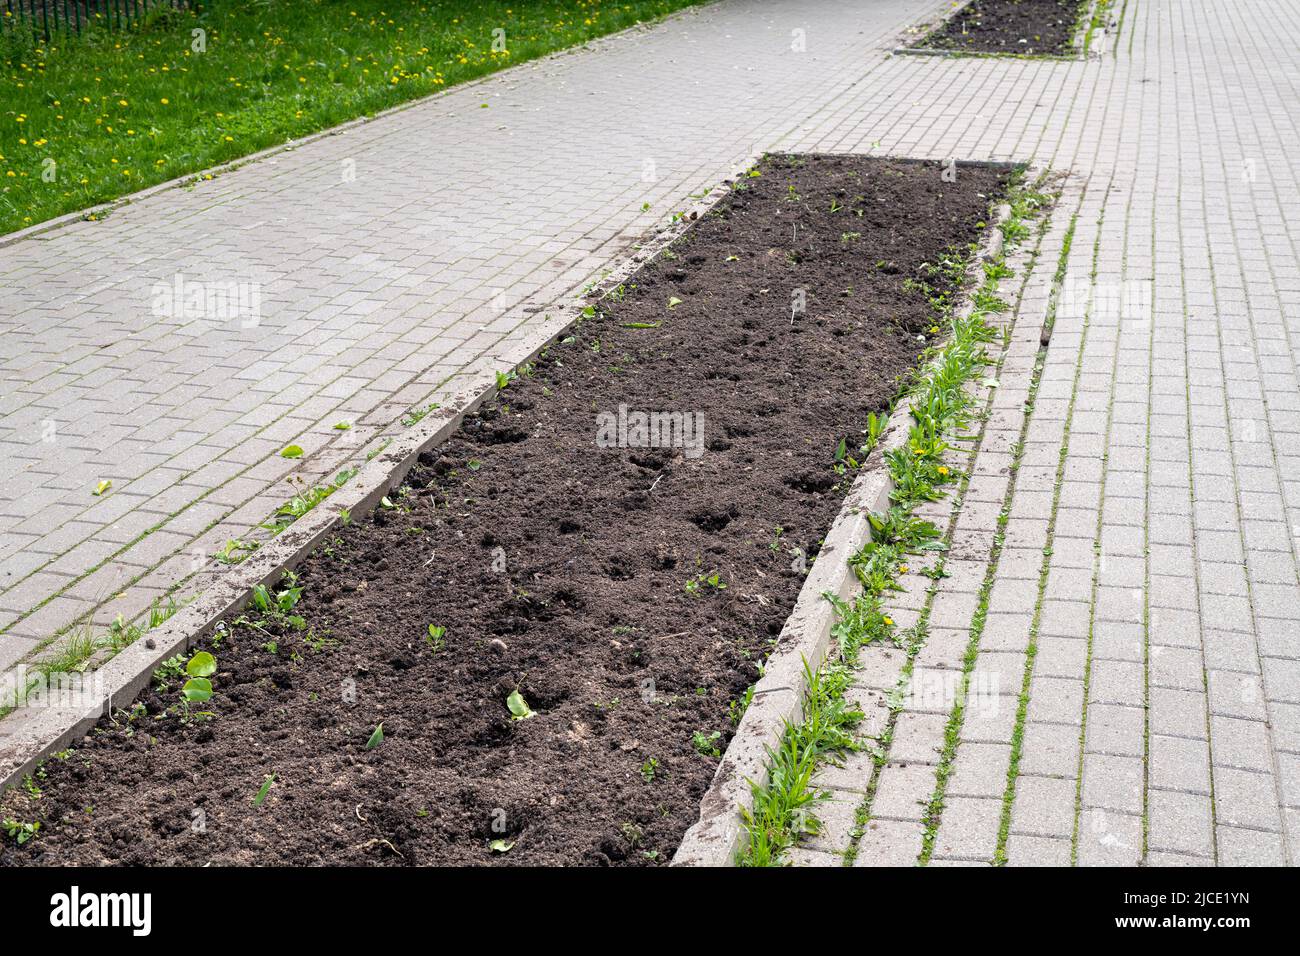 Land on a city flower bed prepared for planting flowers in Moscow, Russia Stock Photo